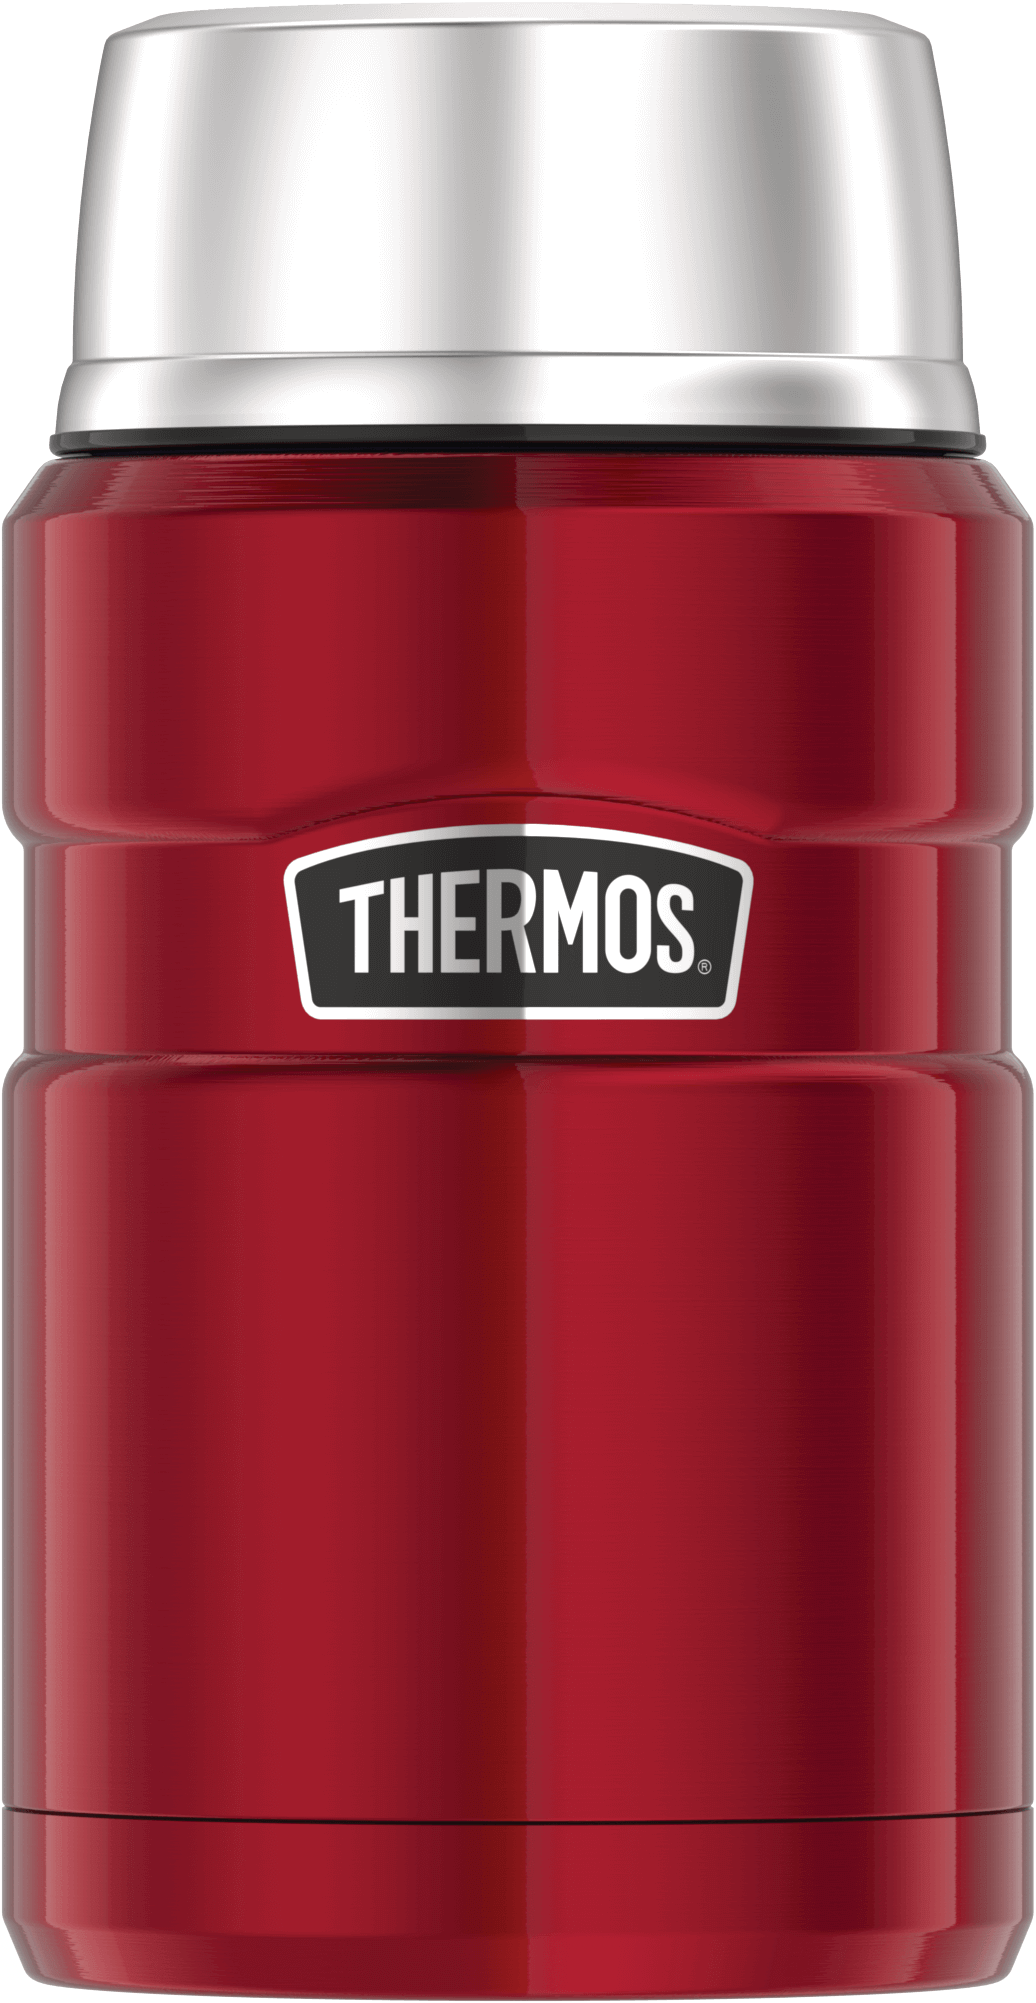 https://thermos.eu/media/produkte/stainless-king-food-jar-insulated-food-container-24-oz-0-71-l/4001248071.png